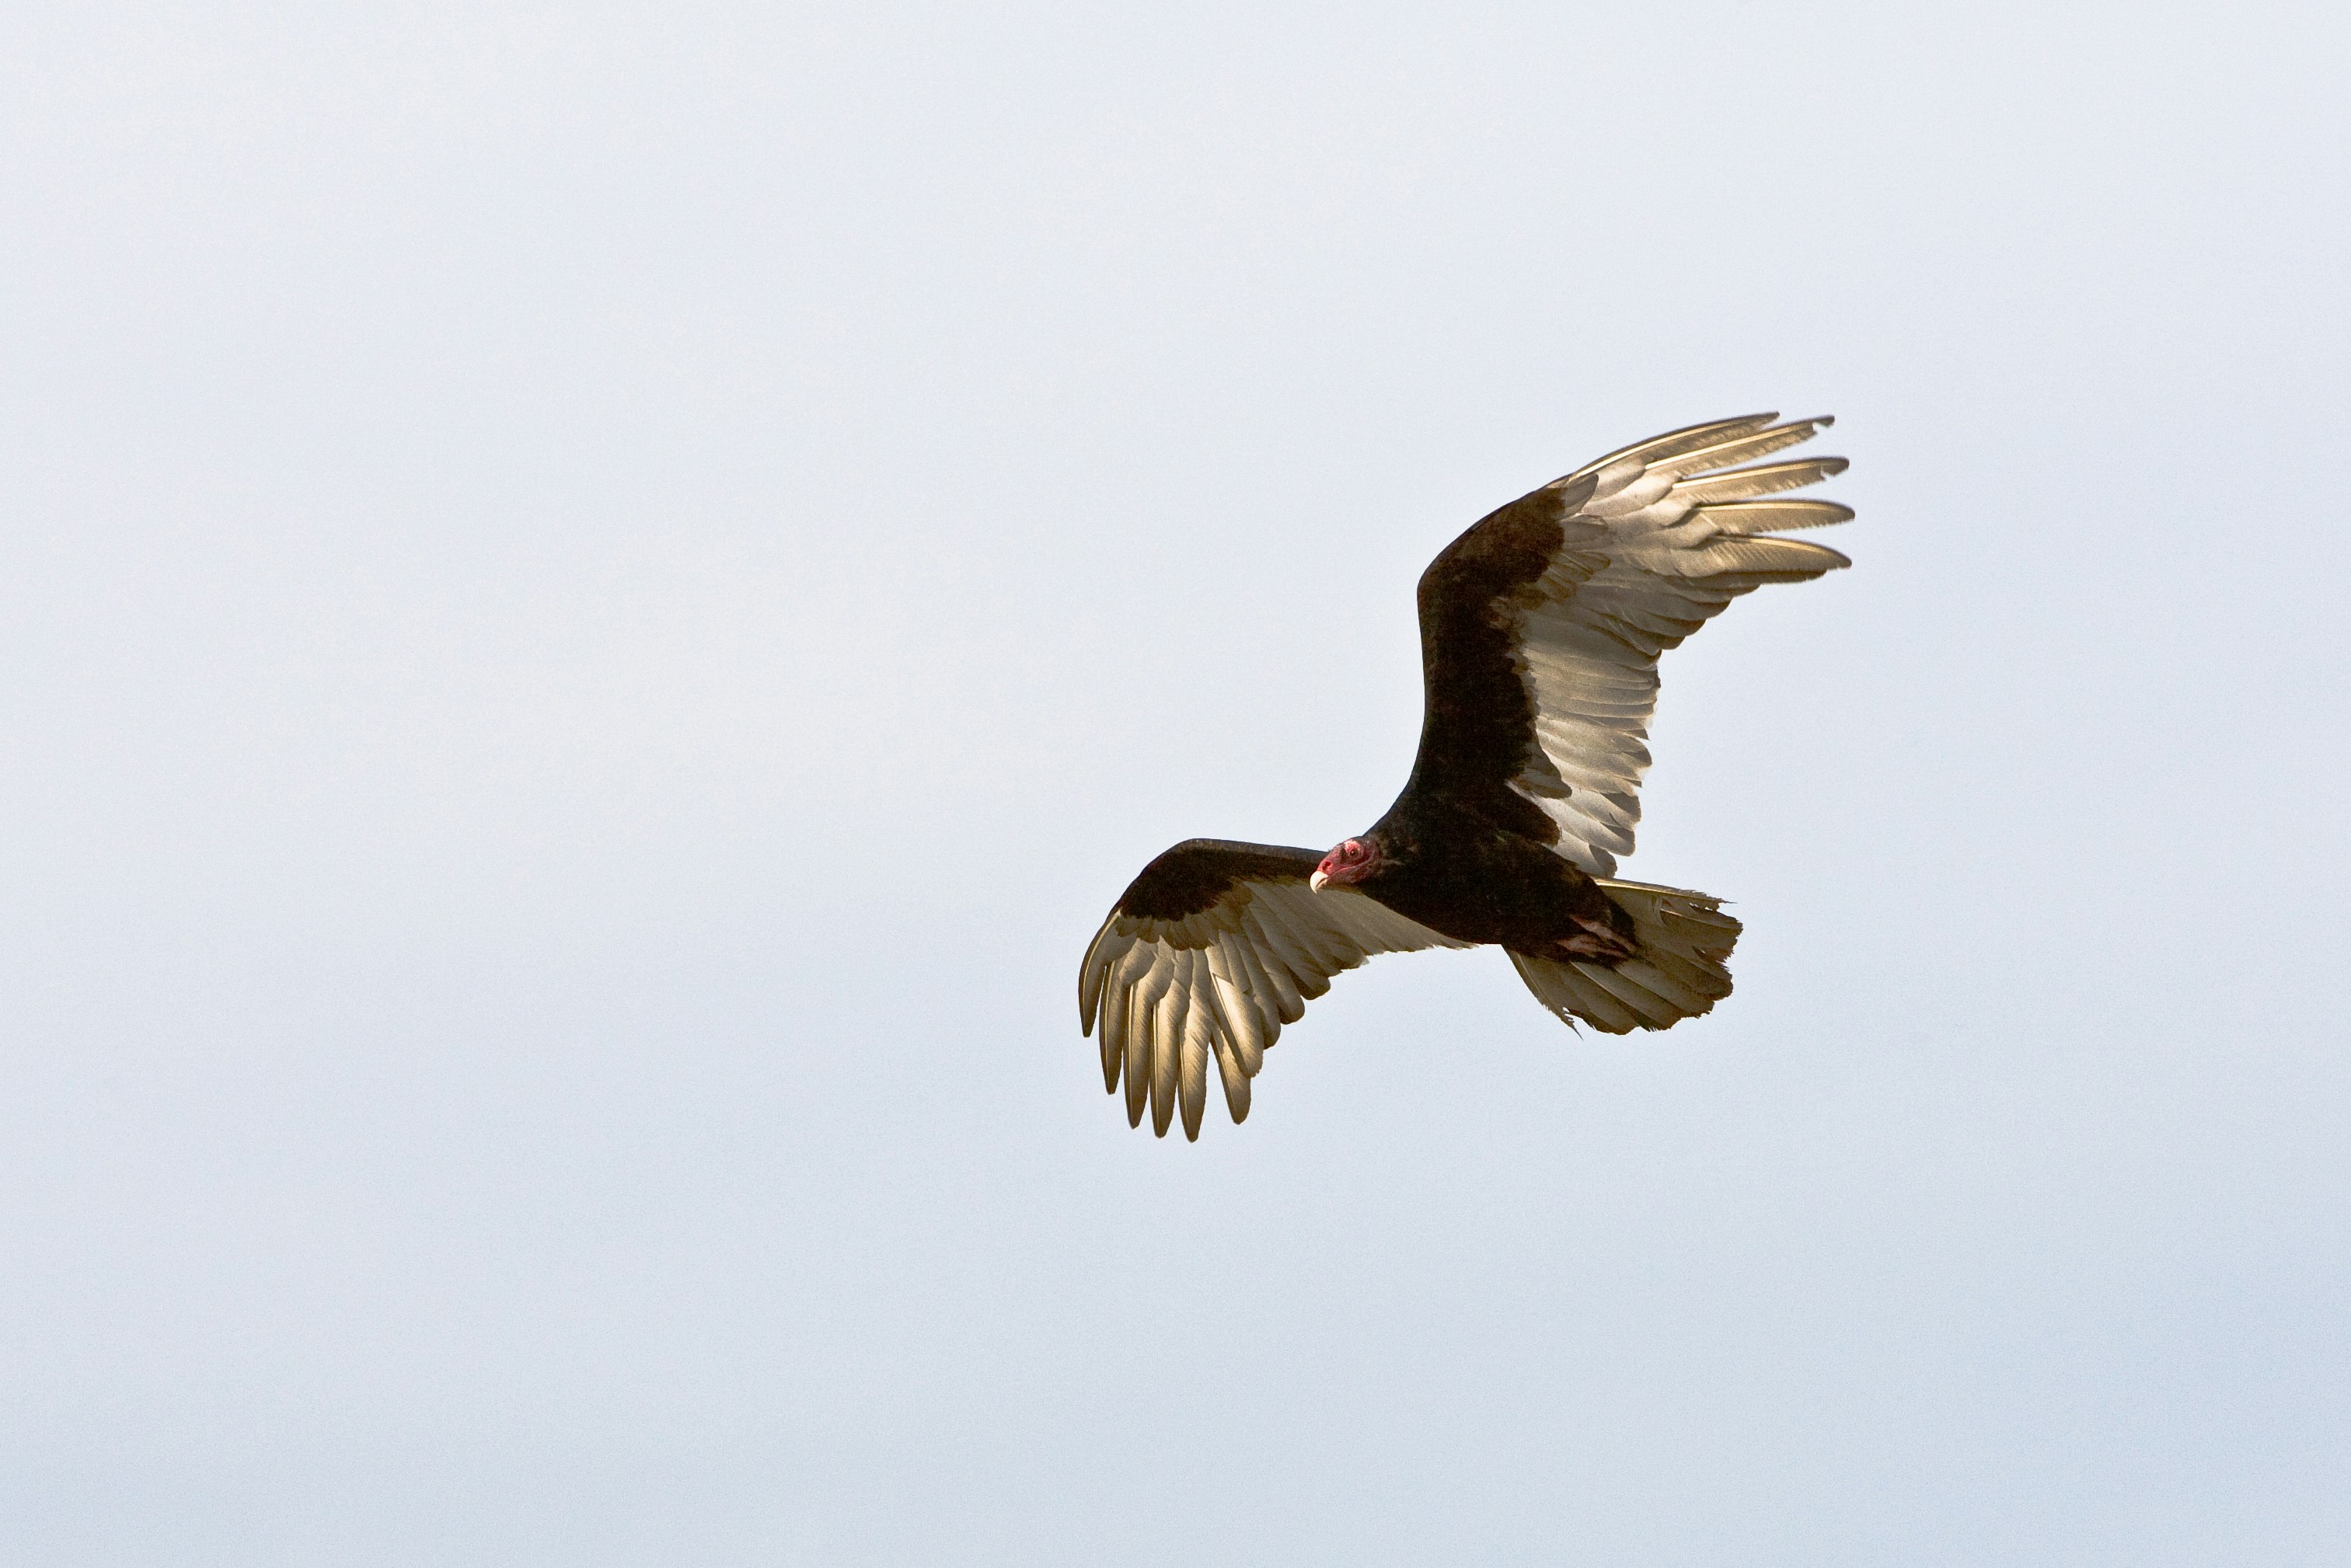 black and brown eagle on flight